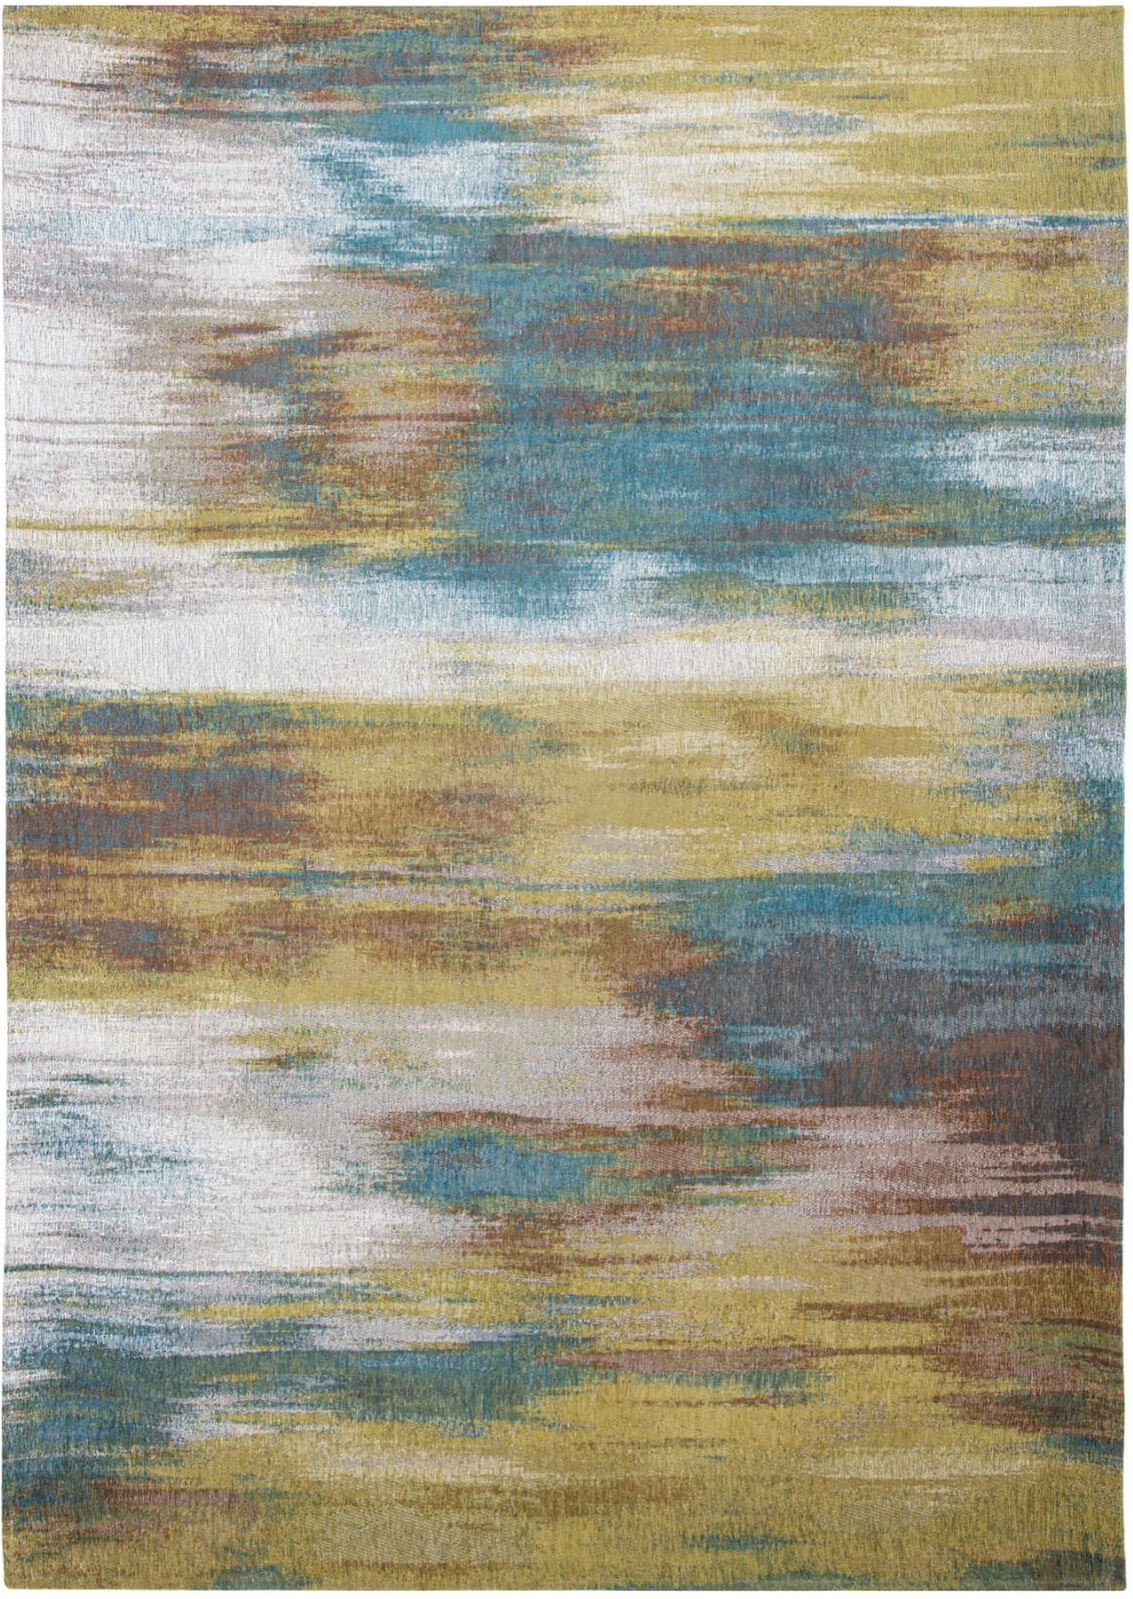 Abstract Flatwoven Bronze Rug ☞ Size: 9' 2" x 12' (280 x 360 cm)